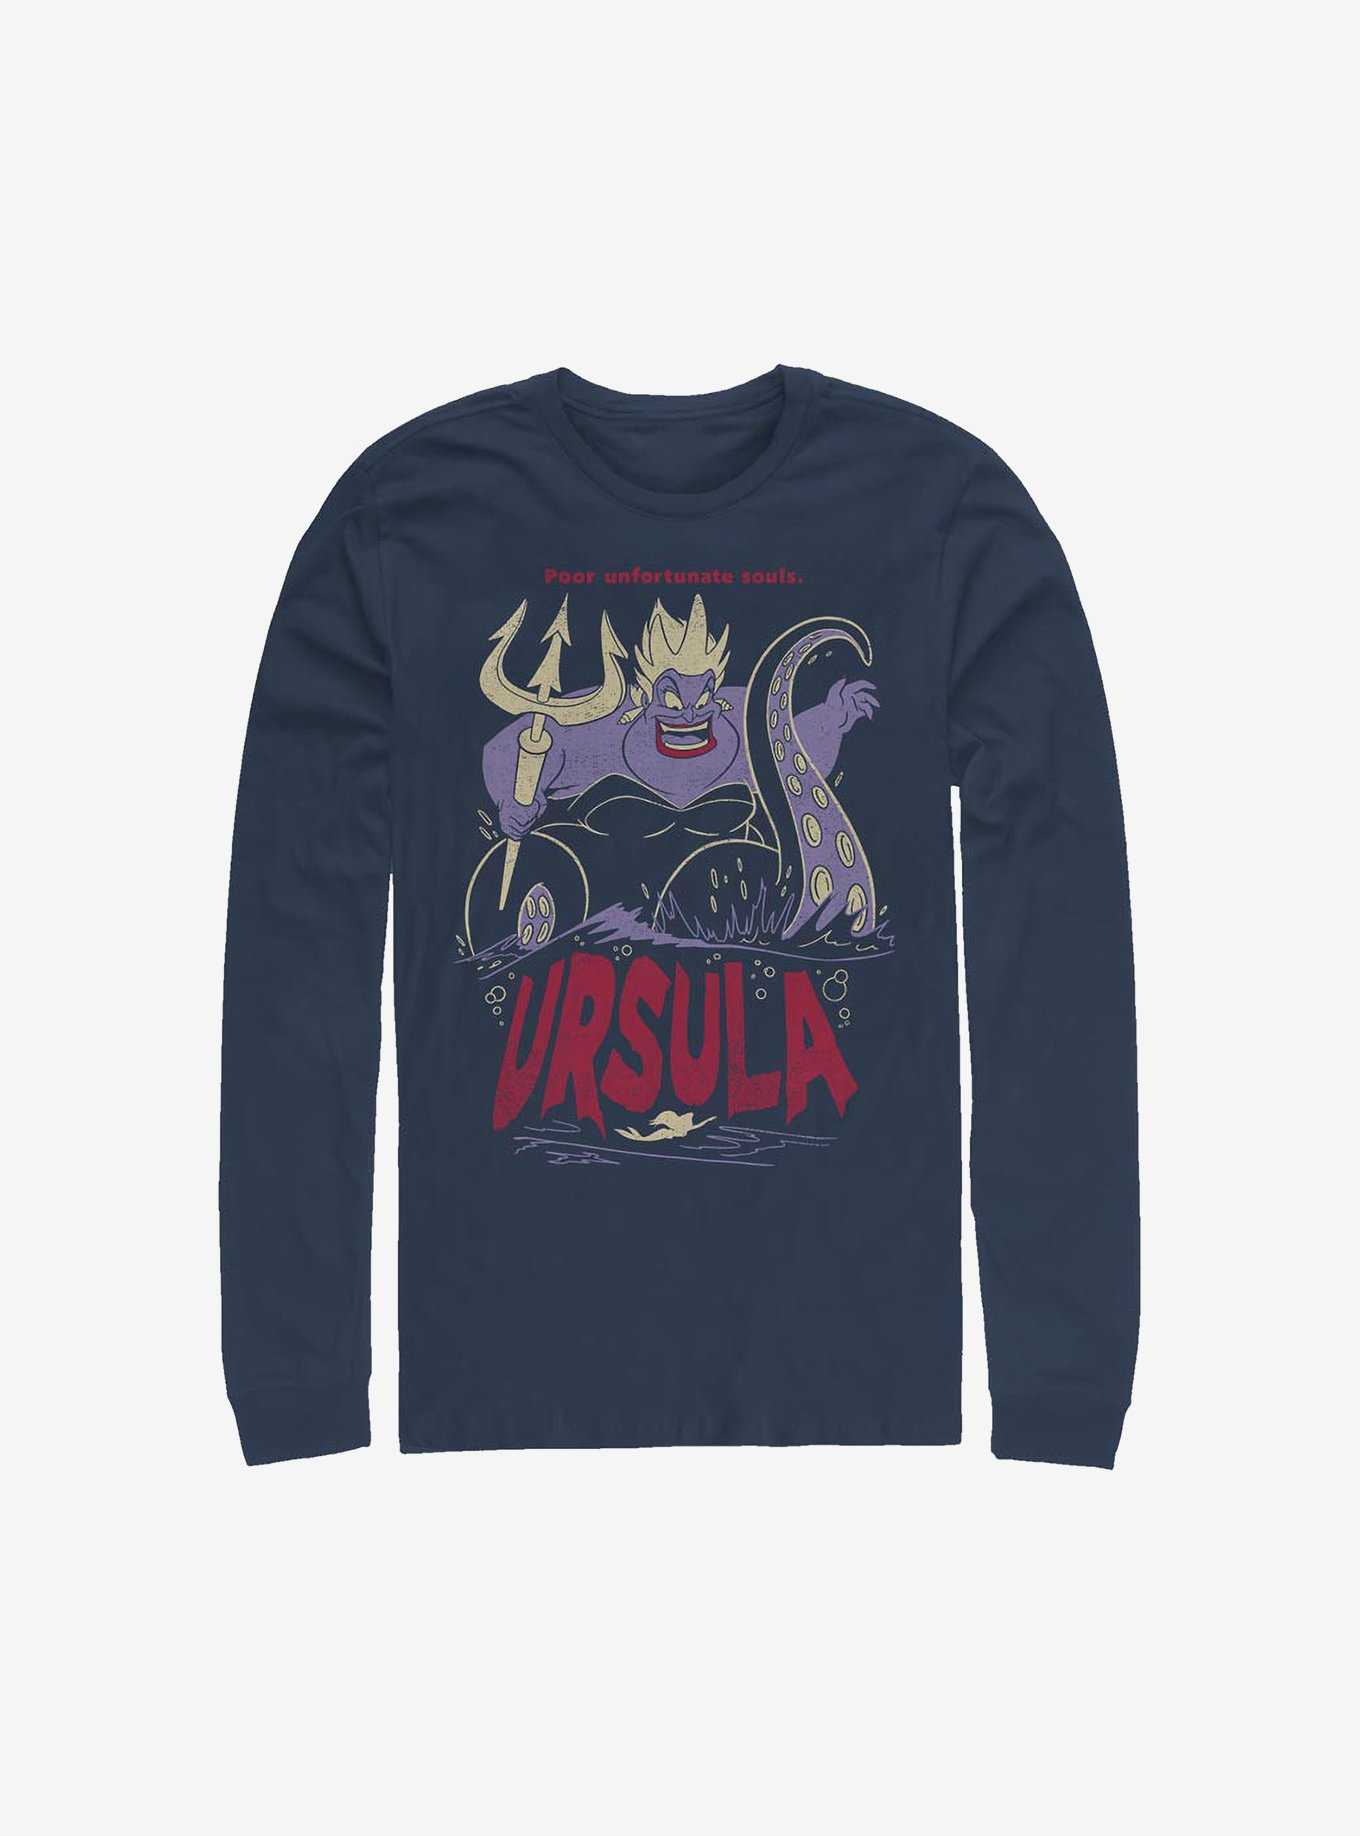 Disney The Little Mermaid Ursula The Sea Witch Long-Sleeve T-Shirt, , hi-res